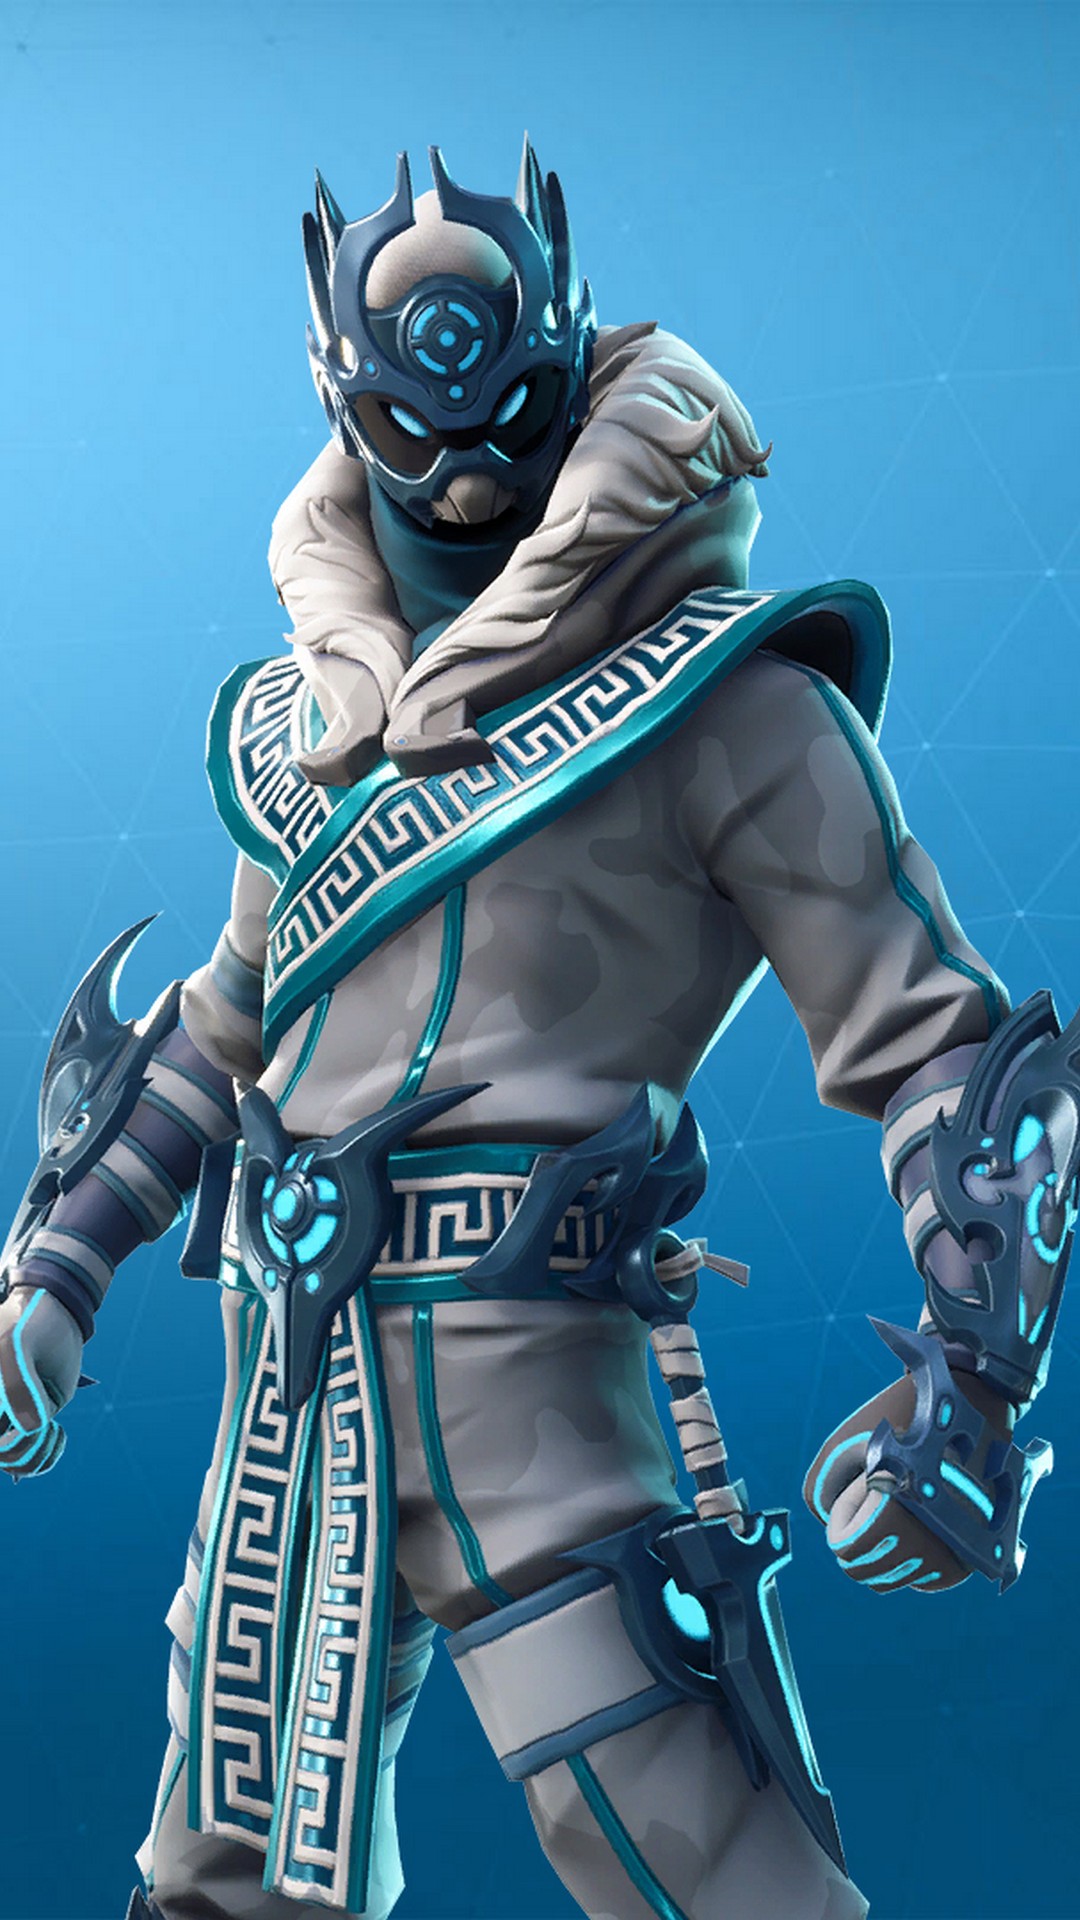 iPhone Wallpaper HD Fortnite With high-resolution 1080X1920 pixel. You can use this wallpaper for your iPhone 5, 6, 7, 8, X, XS, XR backgrounds, Mobile Screensaver, or iPad Lock Screen